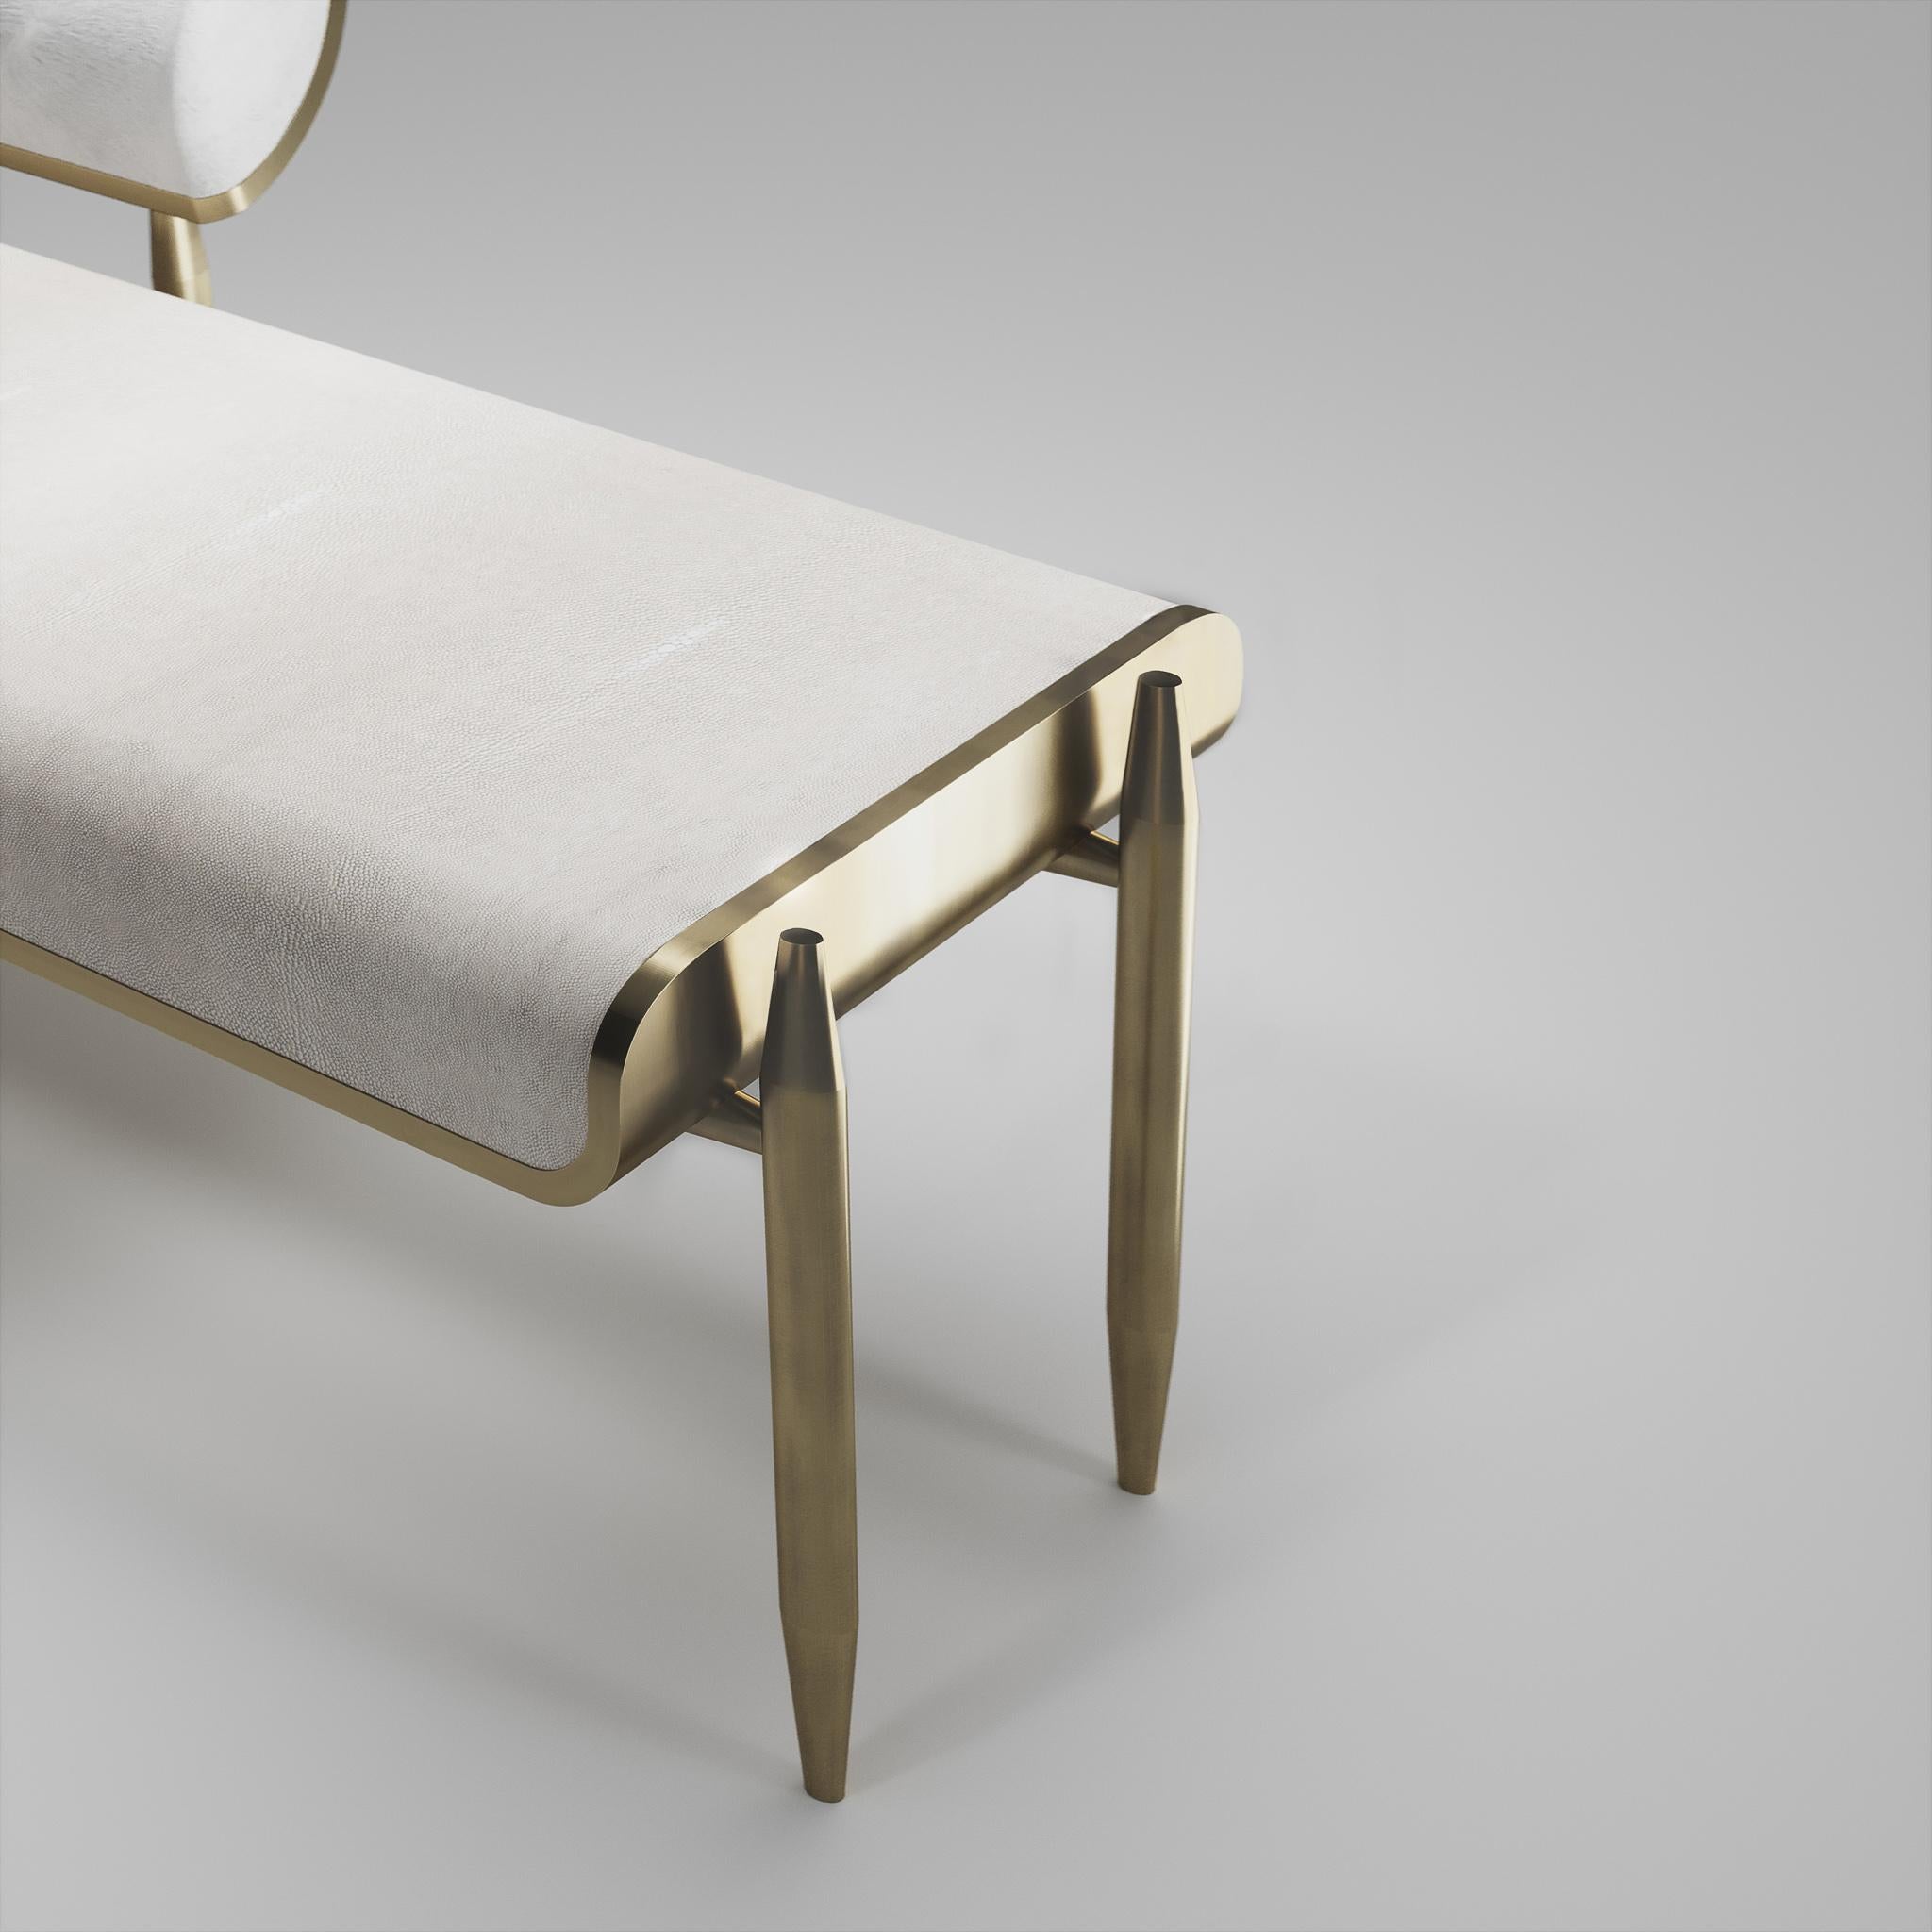 Inspired by the original Dandy bench by Kifu Paris (see images at end of slide), the Dandy II day bed is the ultimate luxury seating. The seating area is inlaid in cream shagreen and the frame, legs and sides of the bench are completely inlaid in